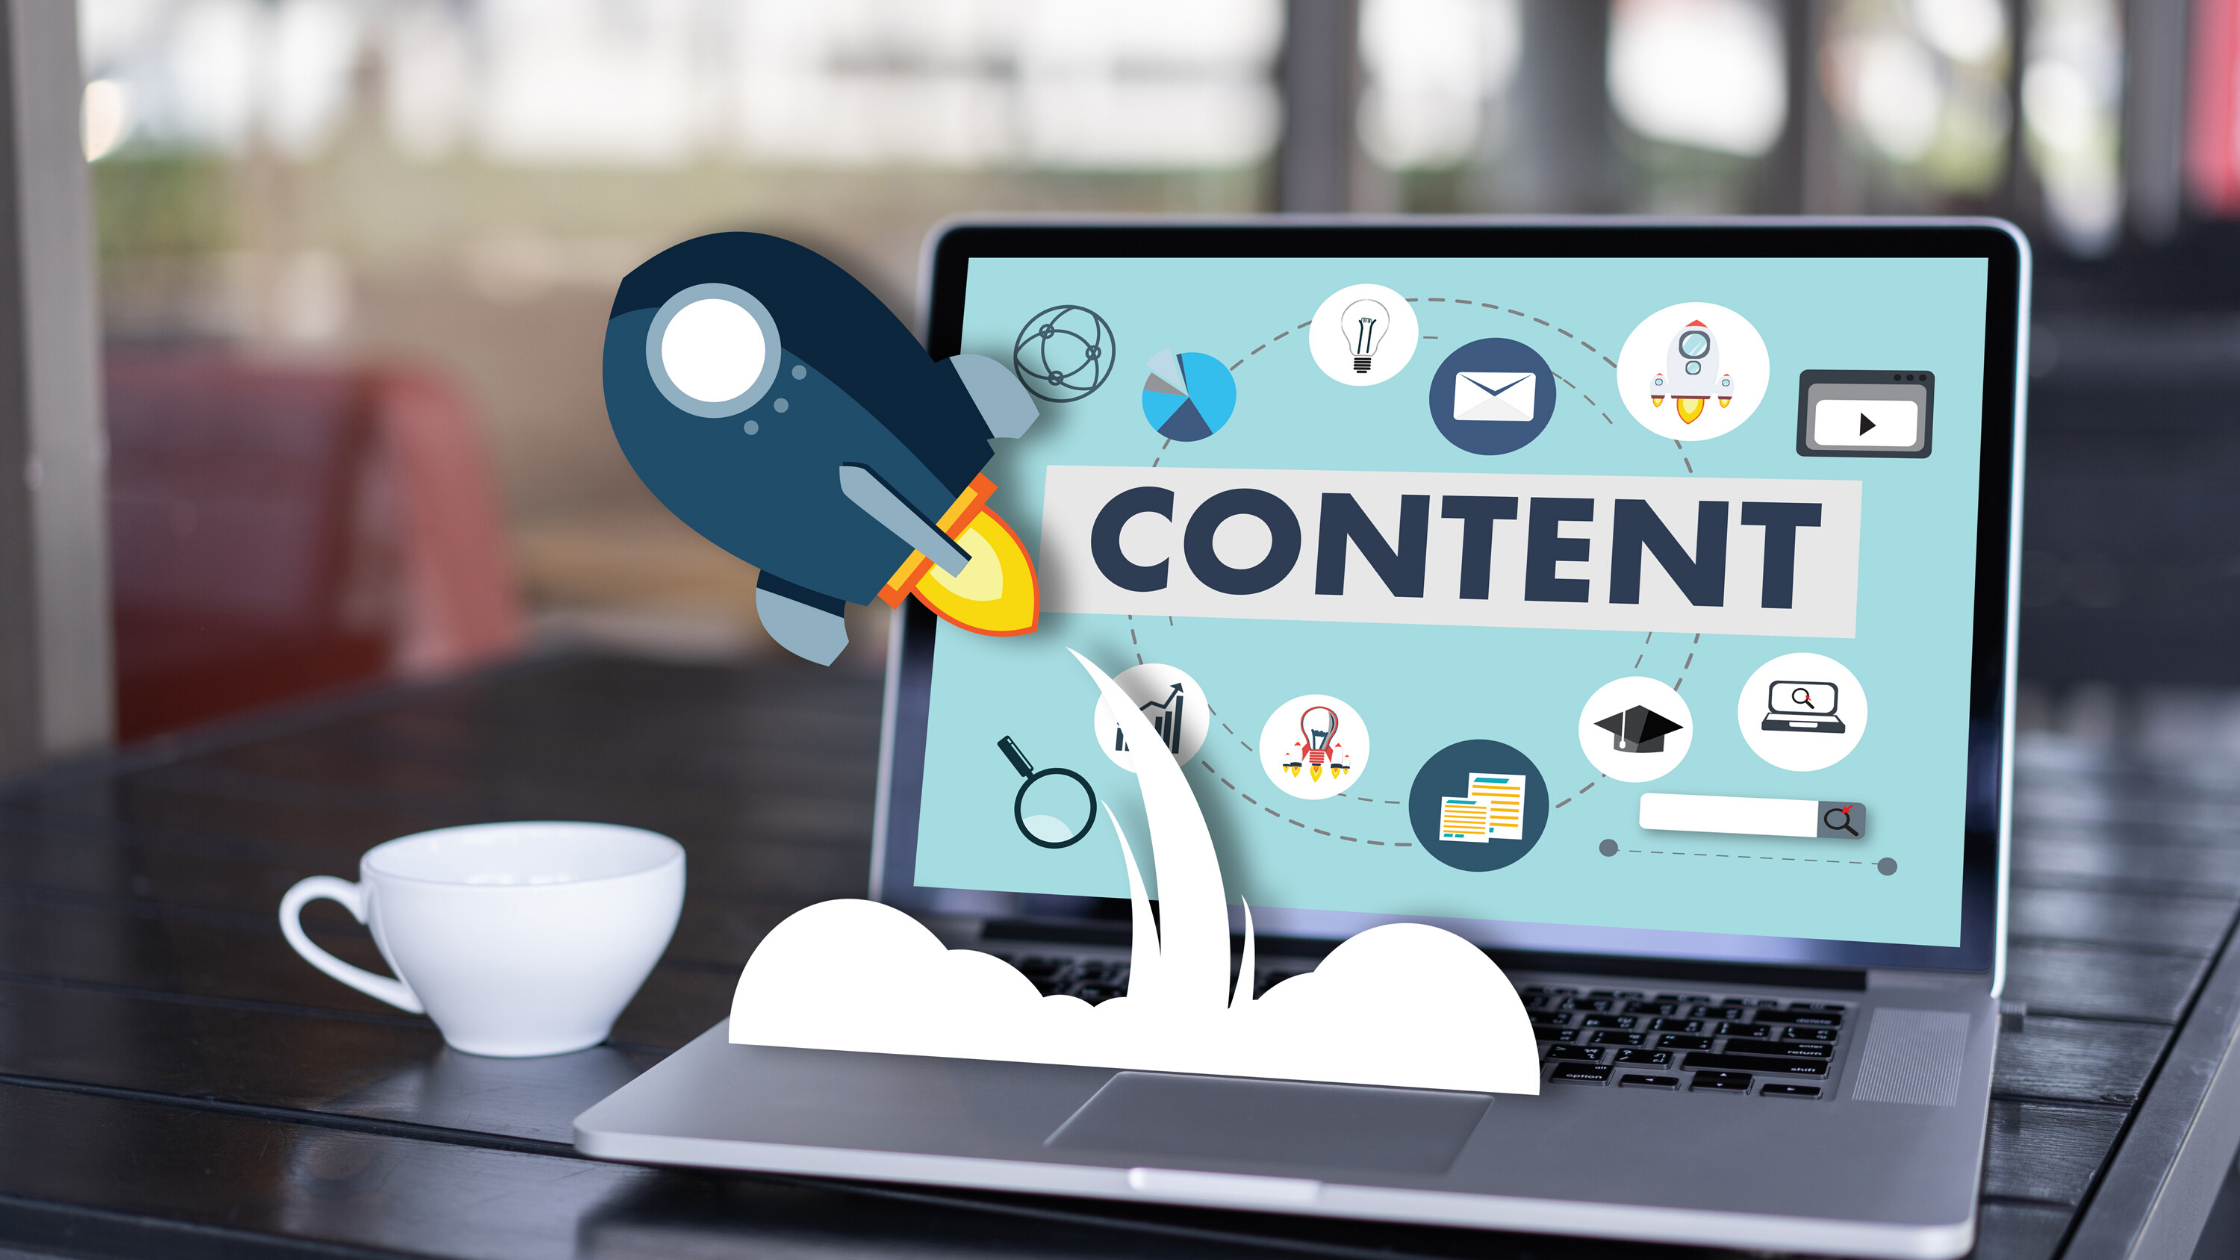 How to make unengaging content engaging